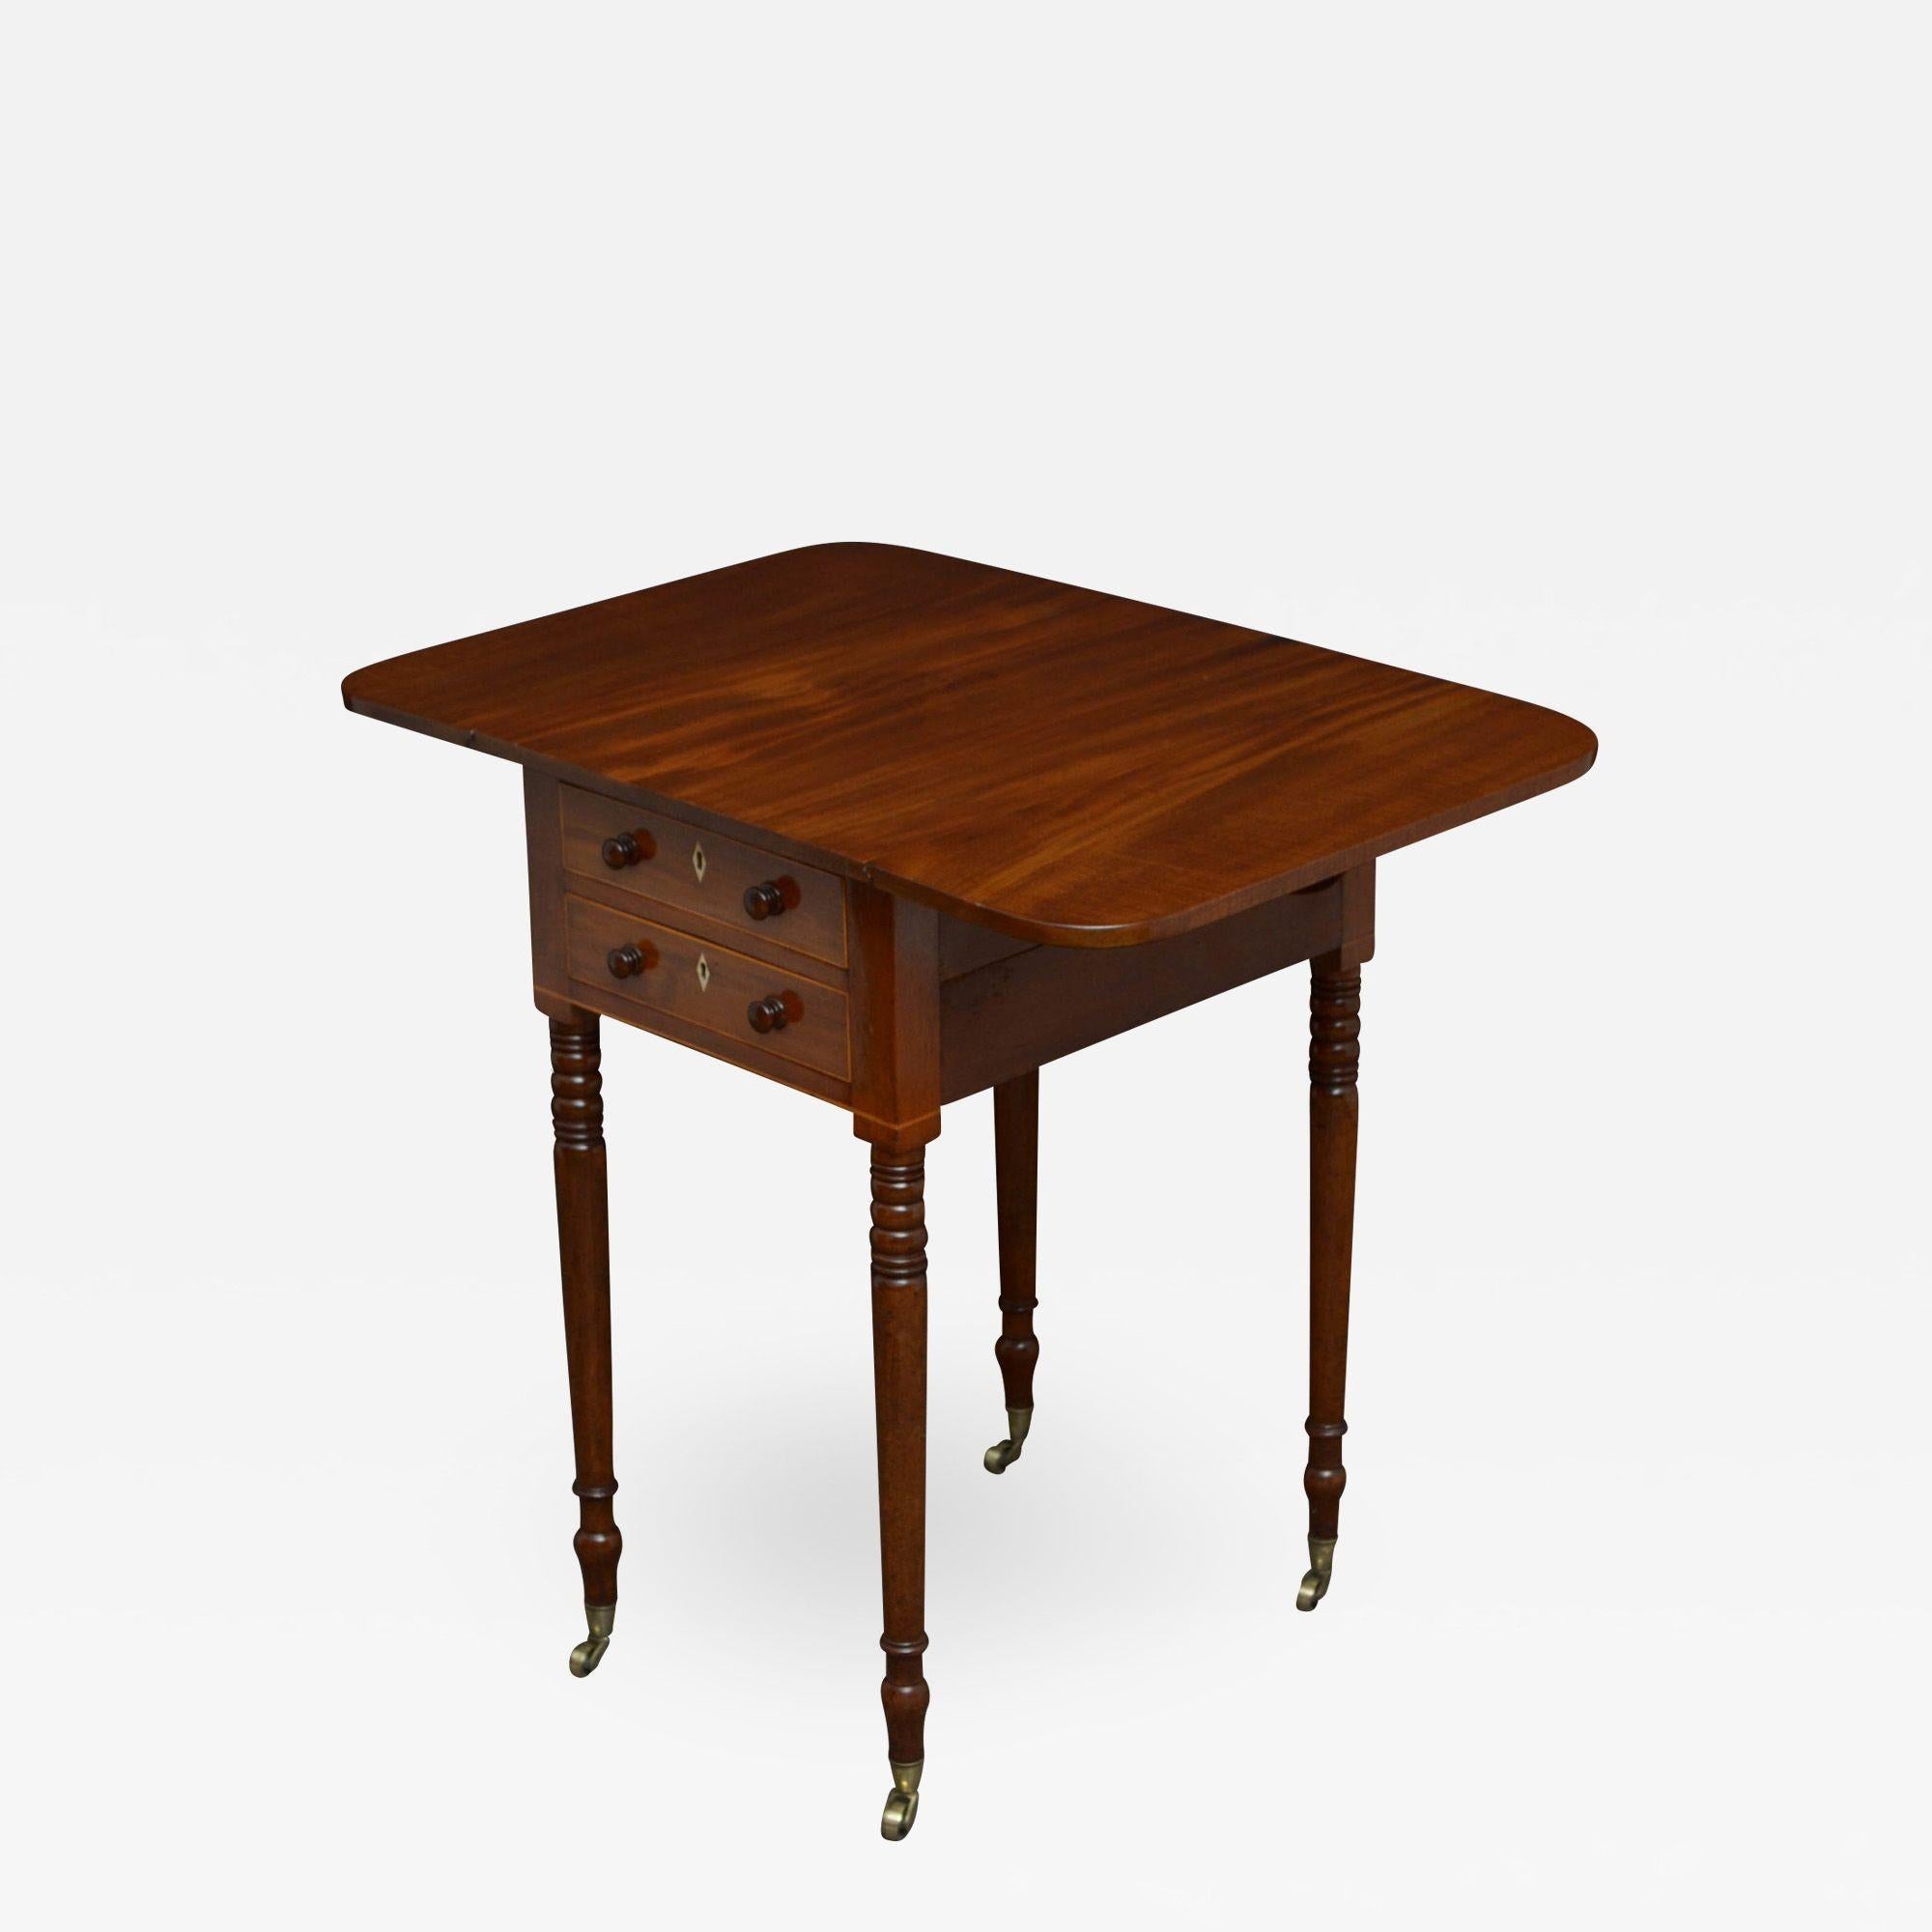 Sn4707 Regency, mahogany, drop leaf occasional table, having figured mahogany top above 2 string inlaid drawer / 2 dummy drawers to opposite side, all fitted with turned handles, raise on elegant turned and ringed legs terminating in original brass